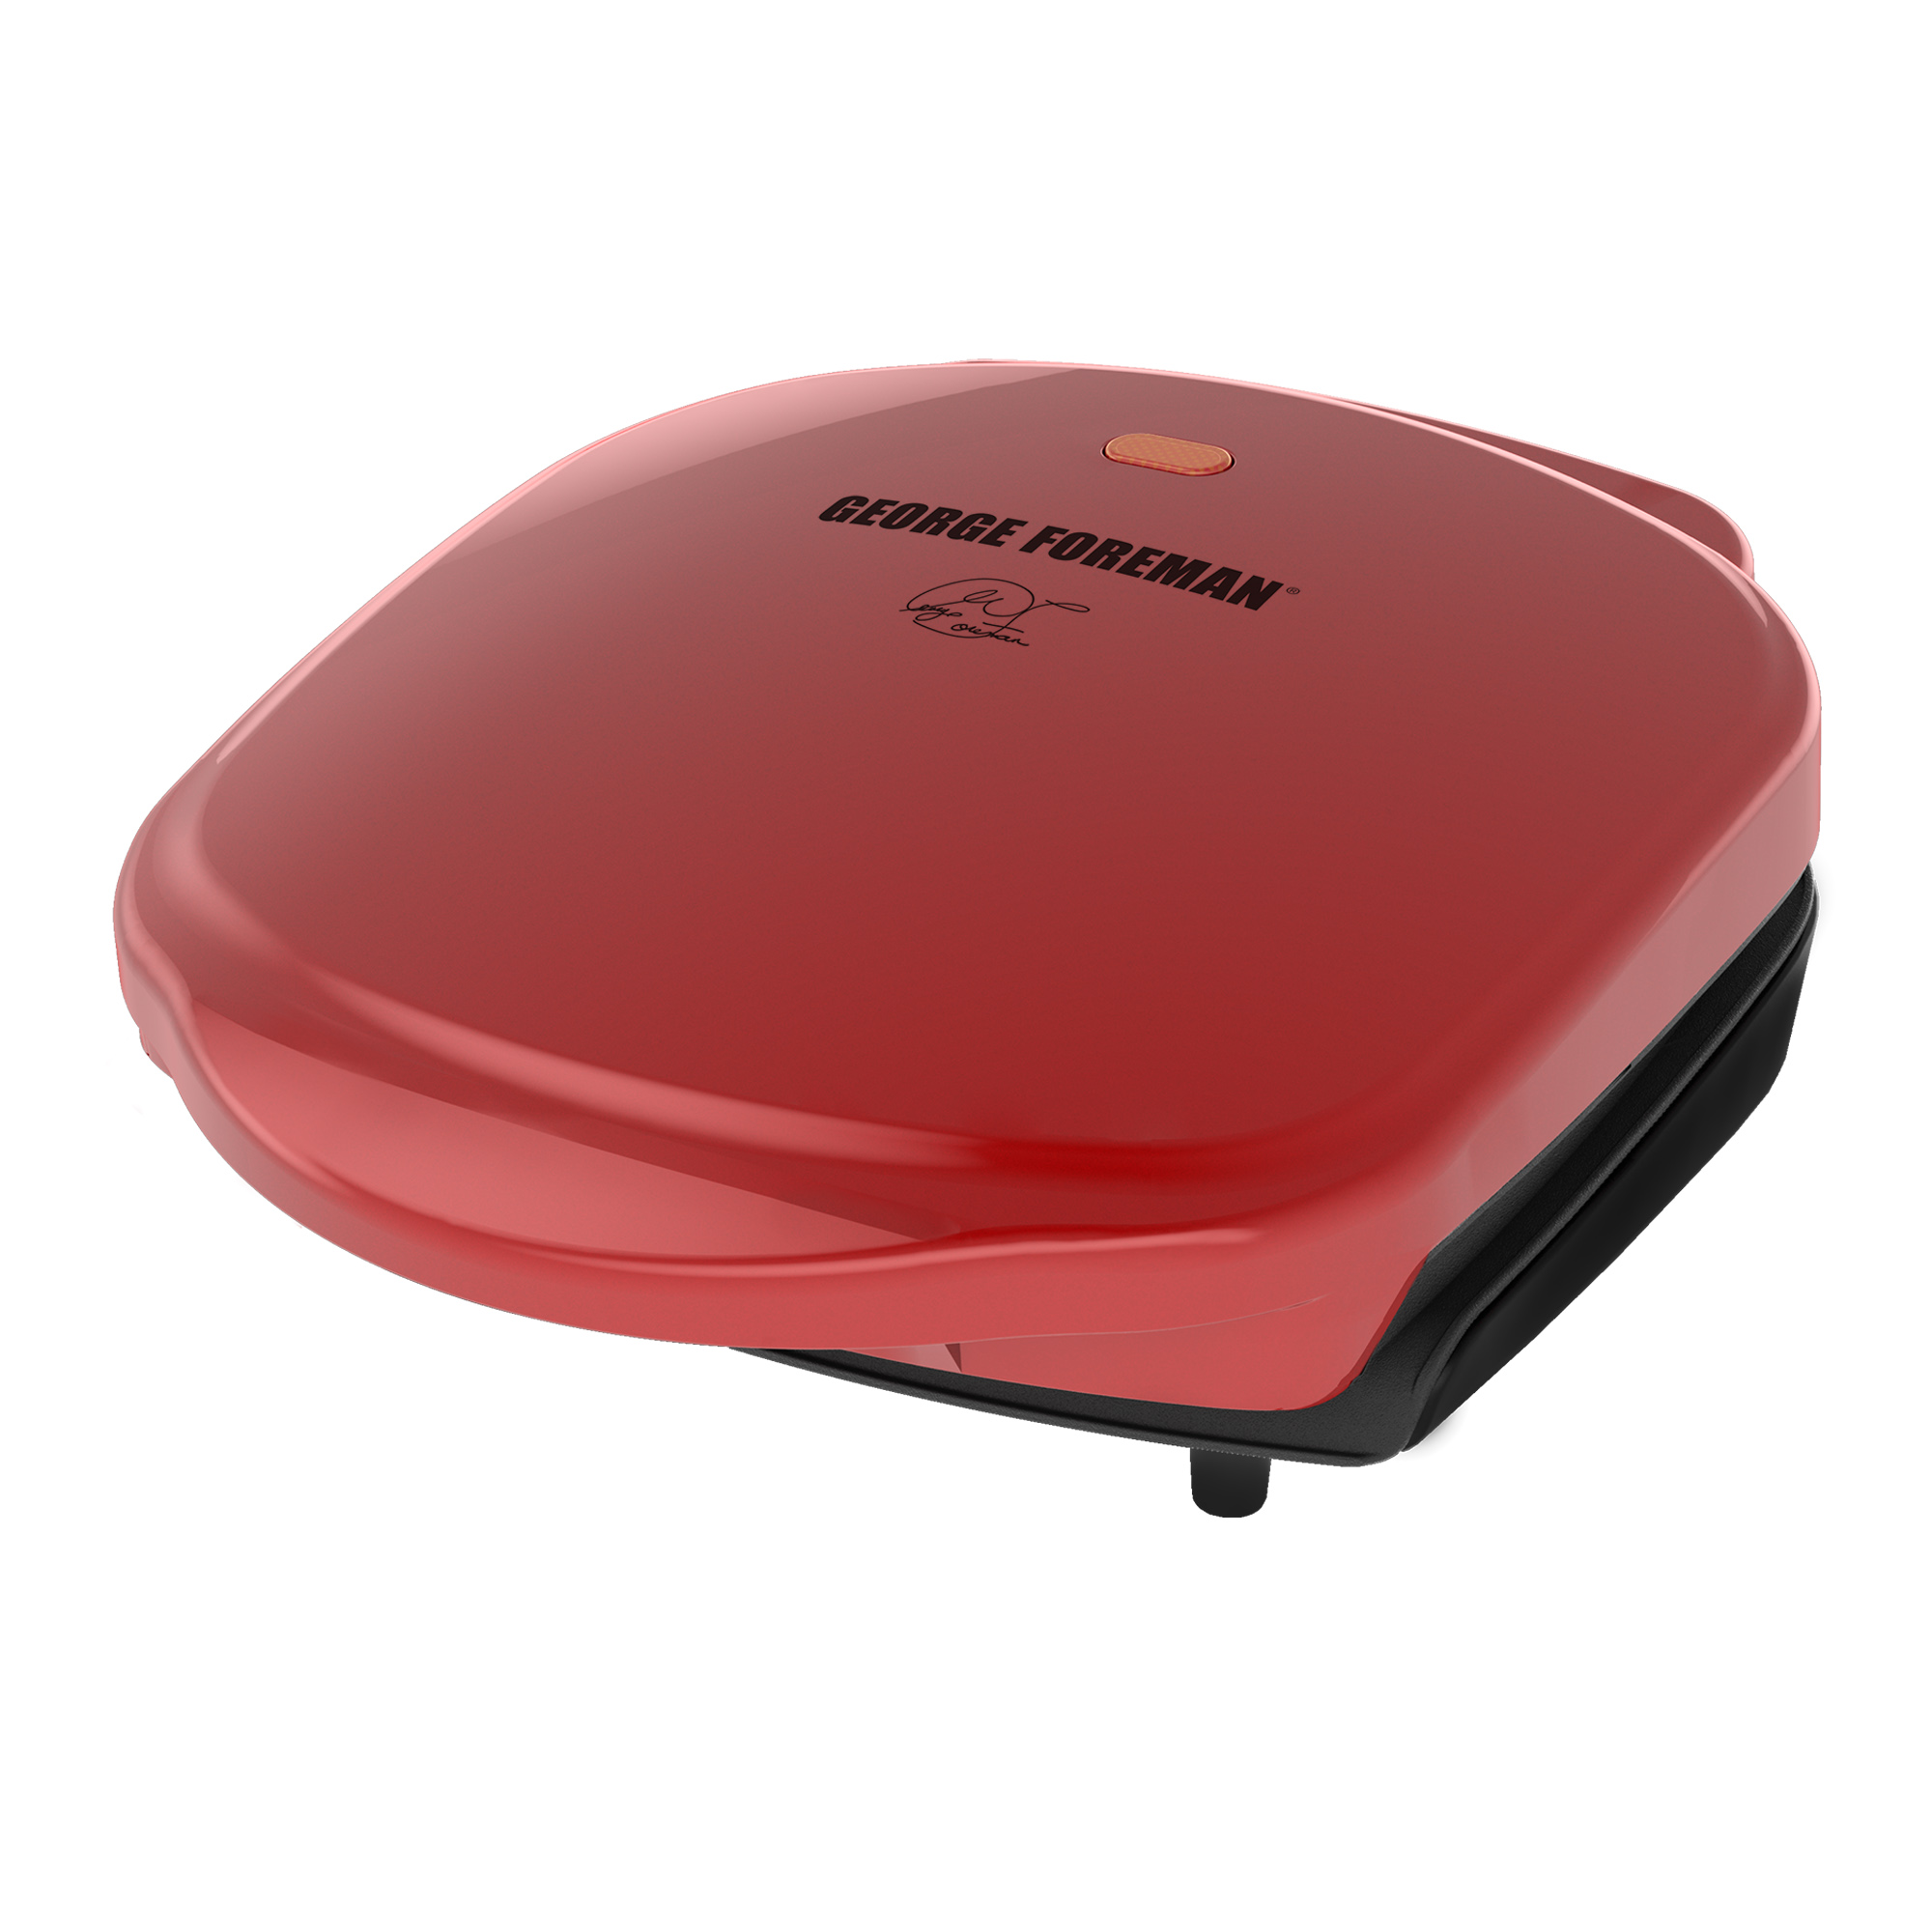 George Foreman Classic Plate Grill Red